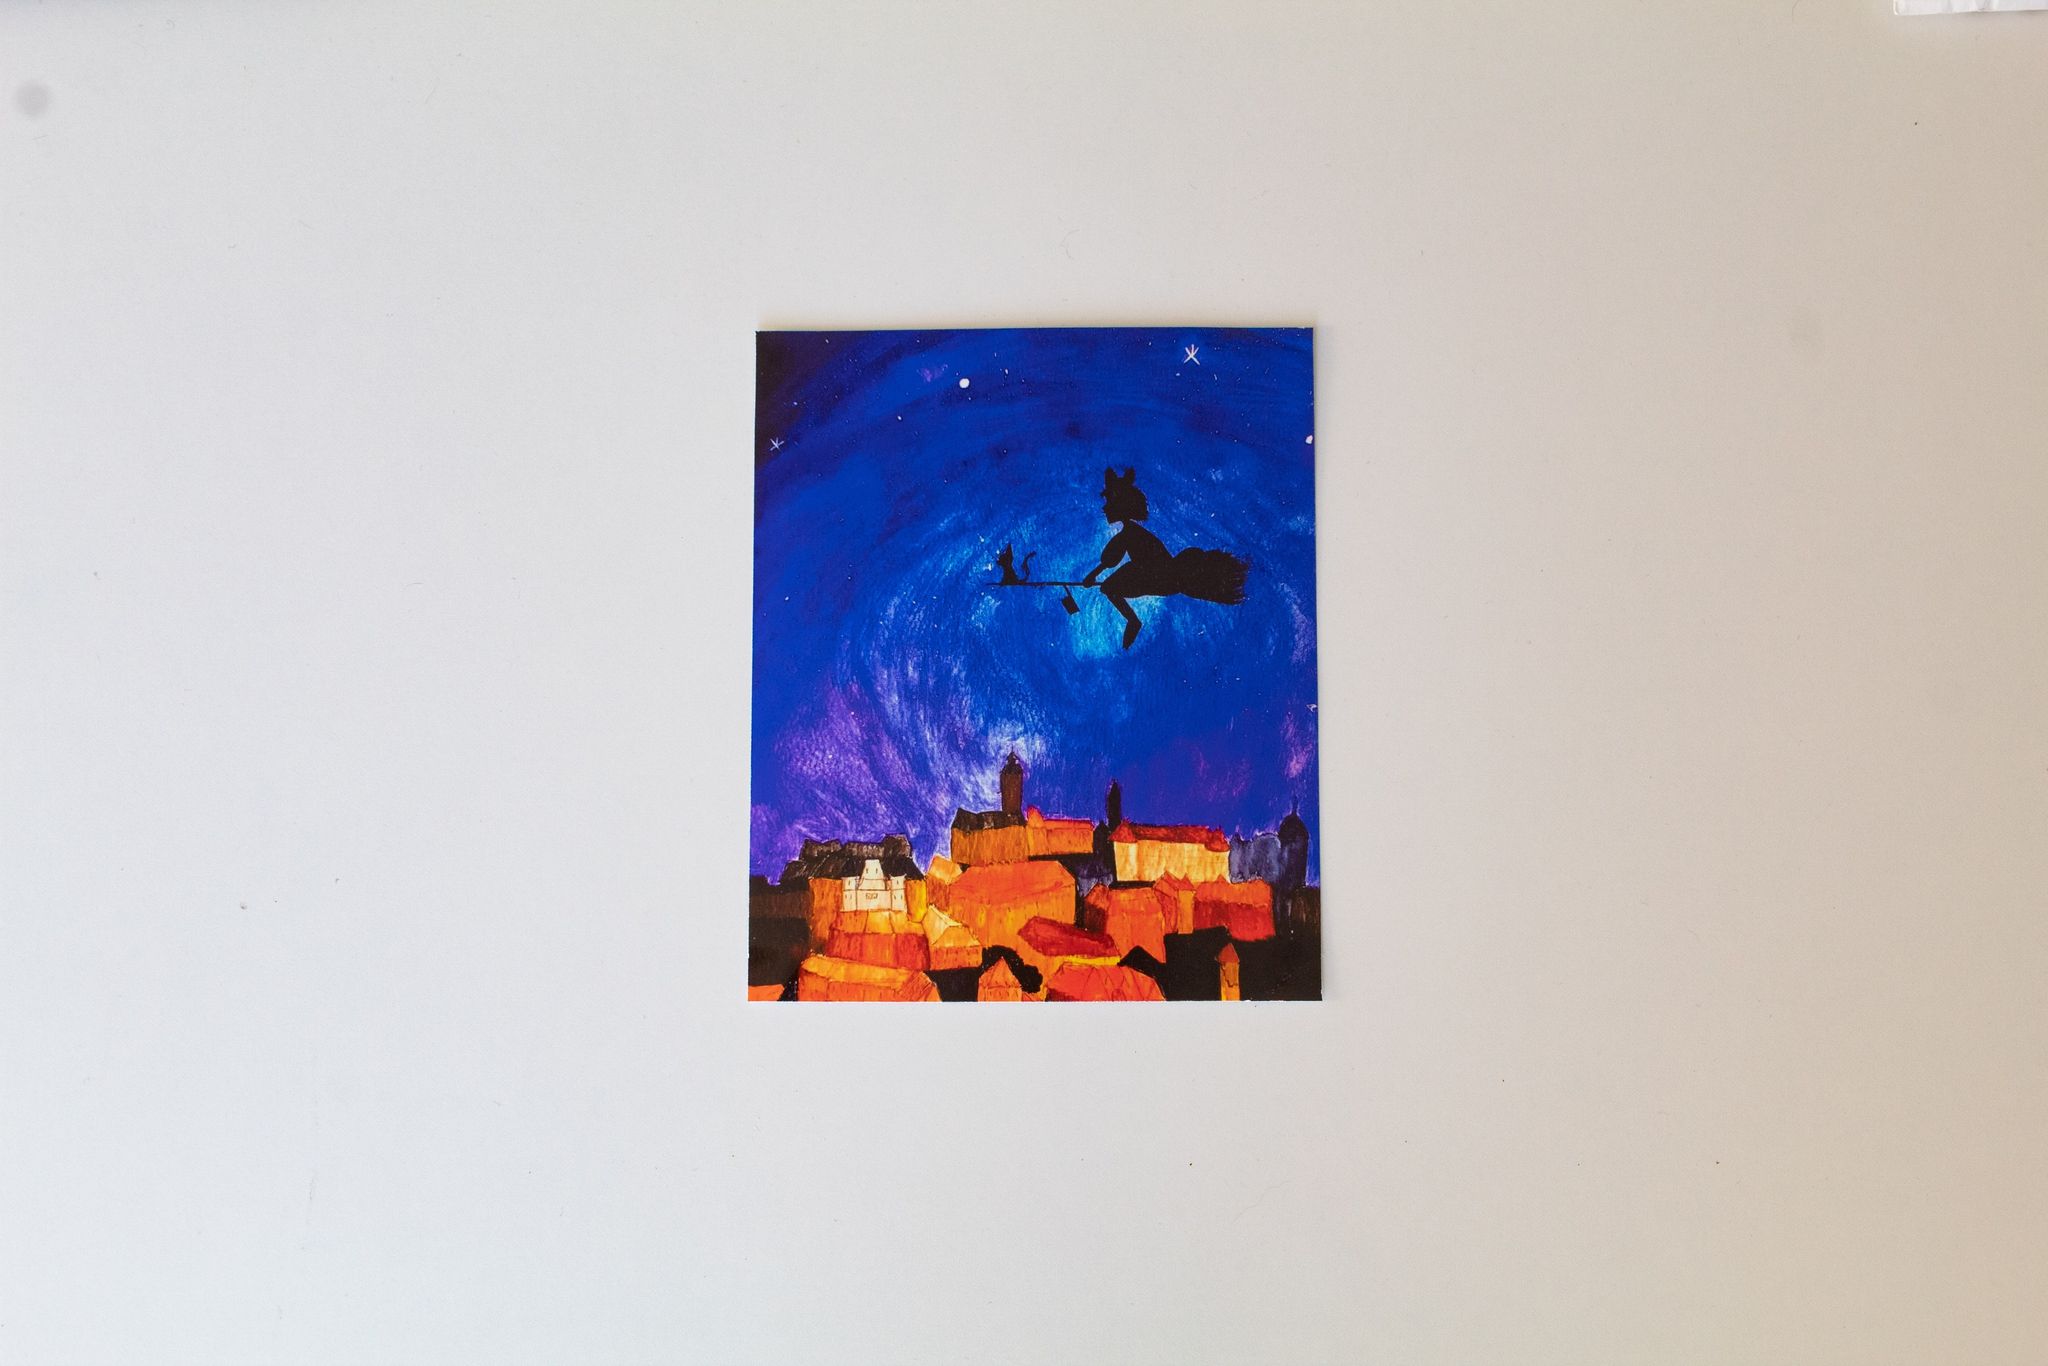 Product image of "A Magical Night" print hung up on a white wall